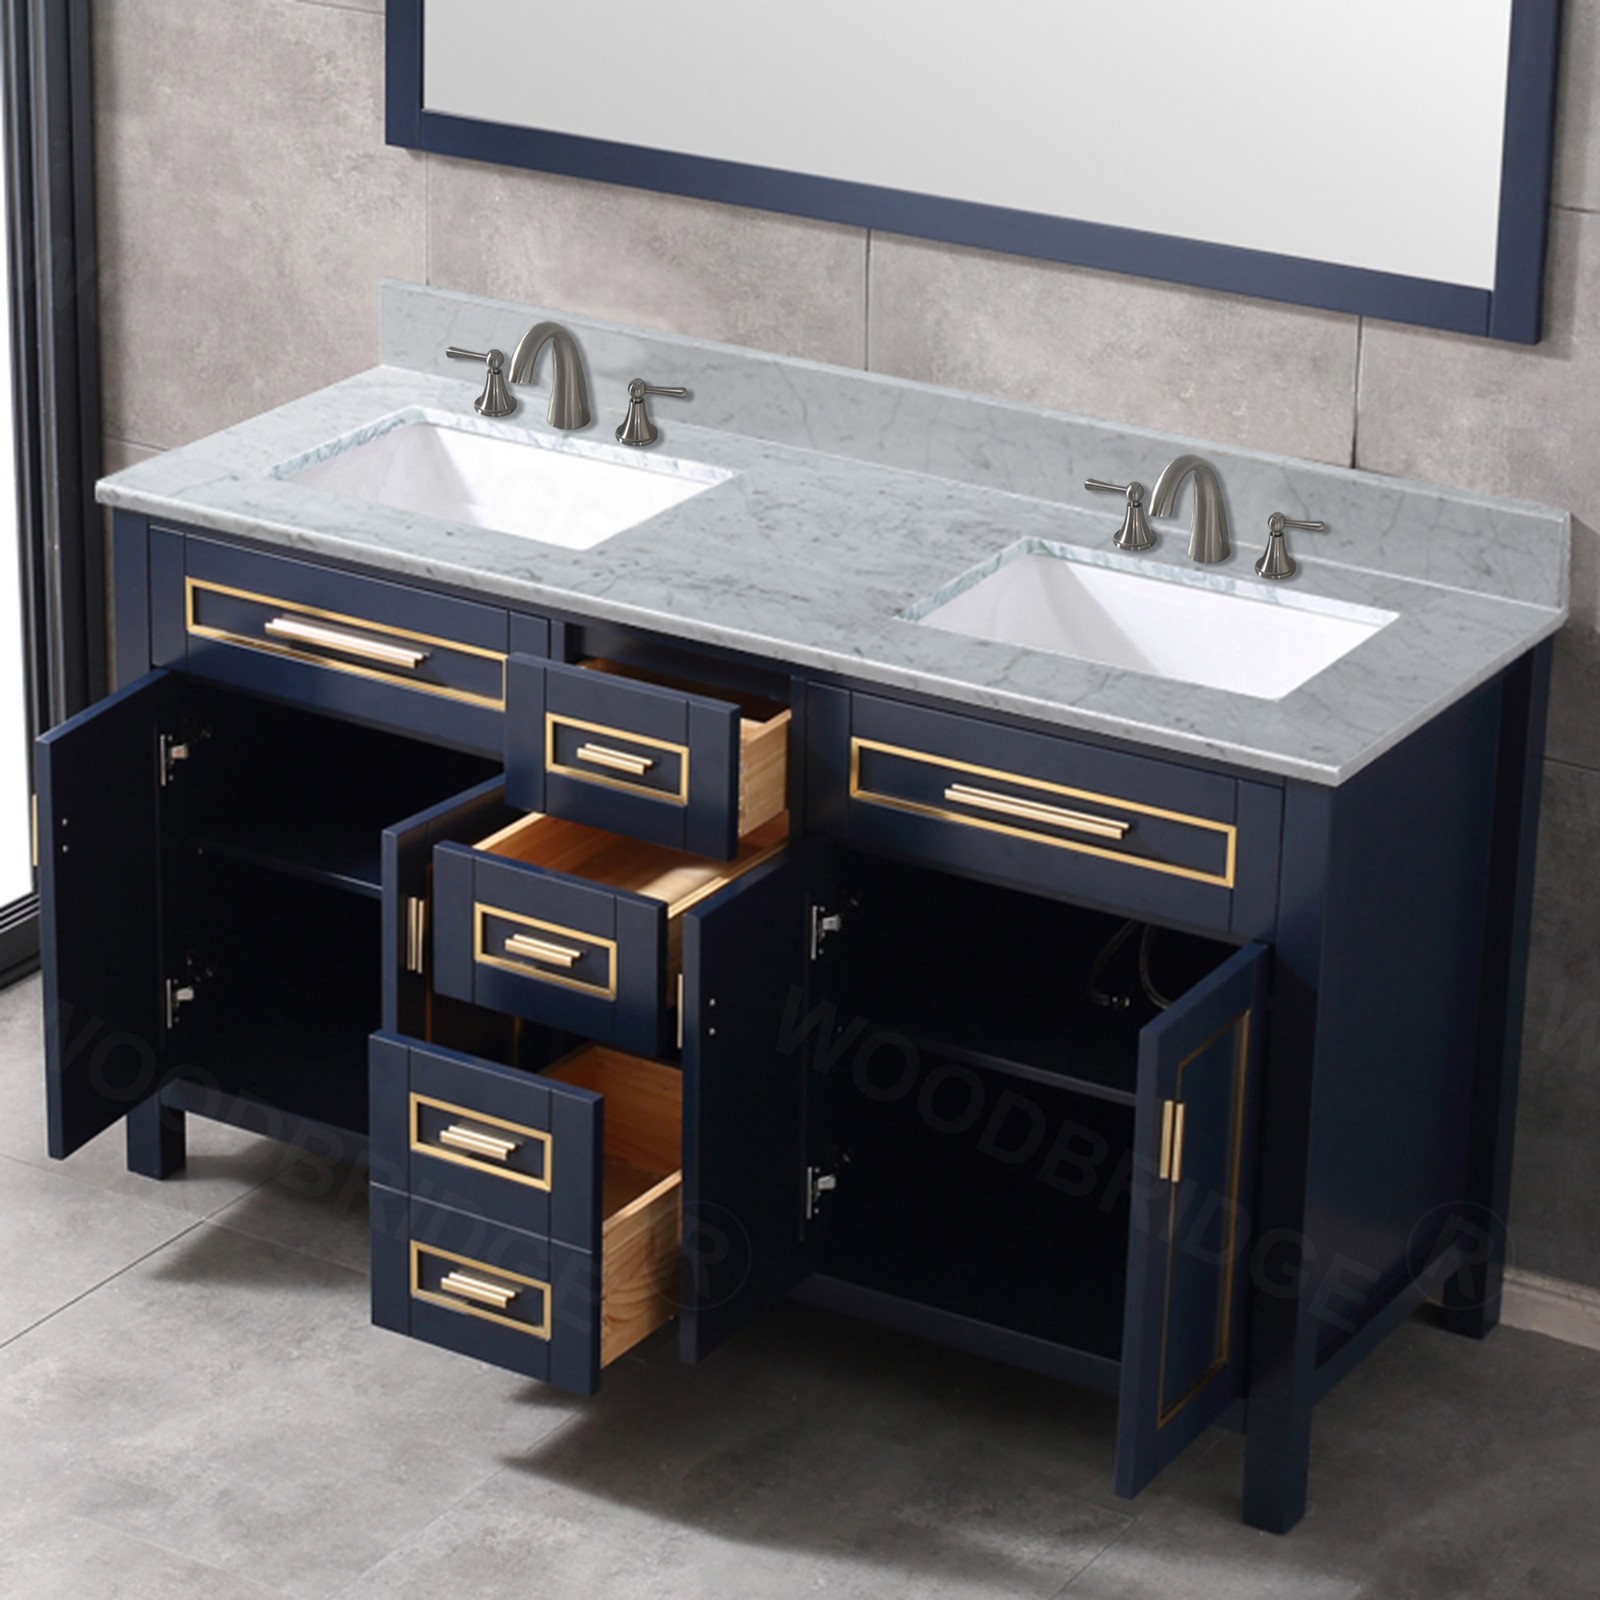  WOODBRIDGE Milan  61” Floor Mounted Single Basin Vanity Set with Solid Wood Cabinet in Navy Blue, and Carrara White Marble Vanity Top with Pre-installed Undermount Rectangle Bathroom Sink in White, Pre-Drilled 3-Hole for 8-inch Widespread Faucet_4650